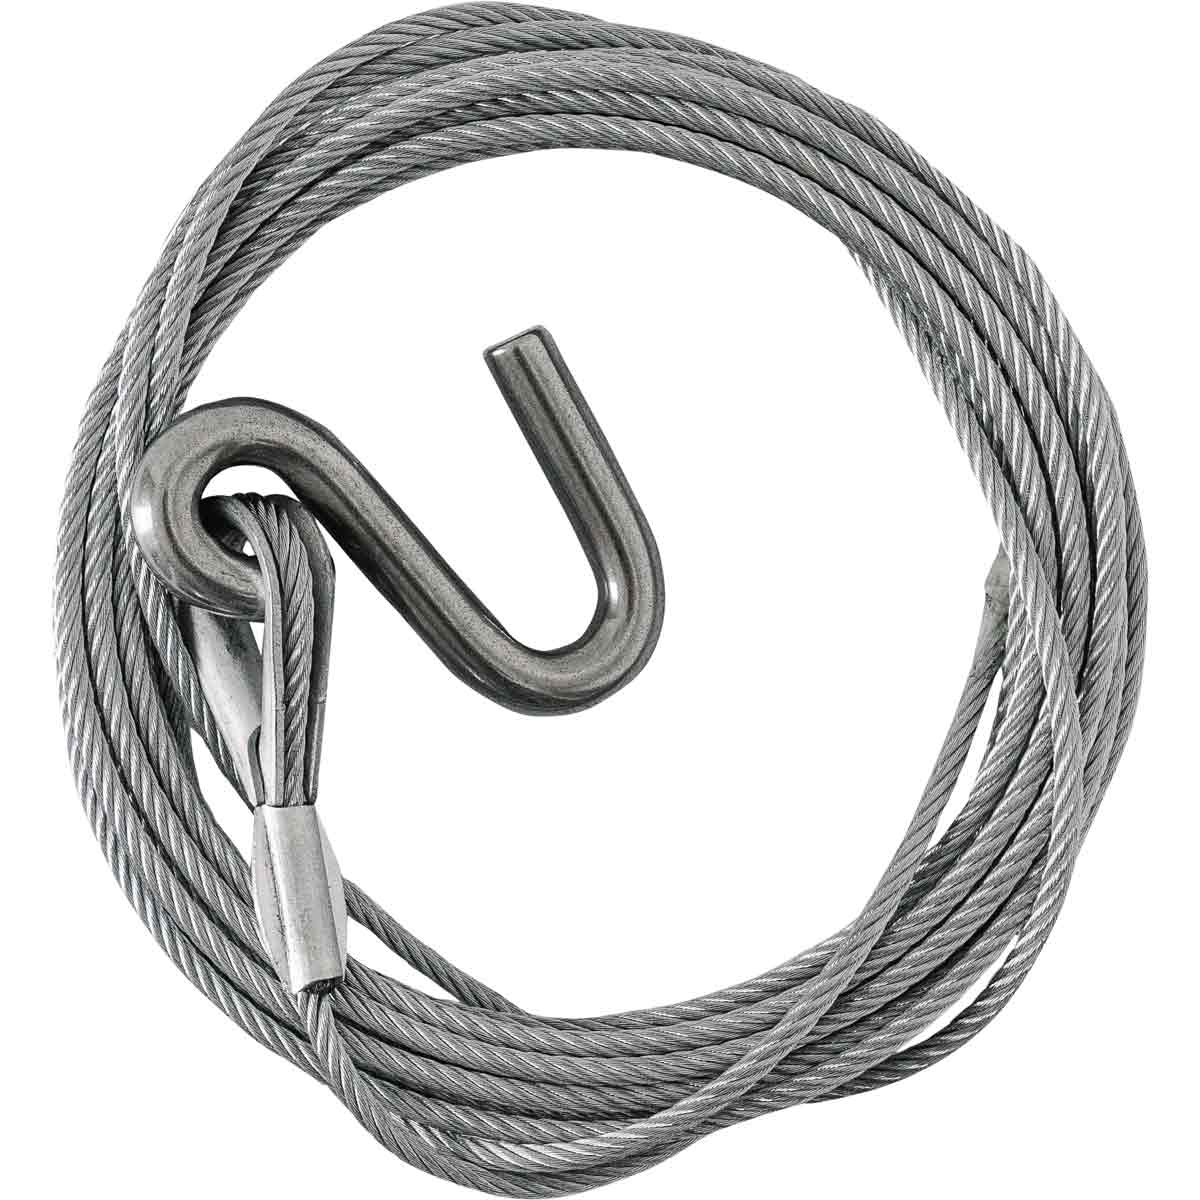 Atlantic S Hook Cable 6m x 4mm